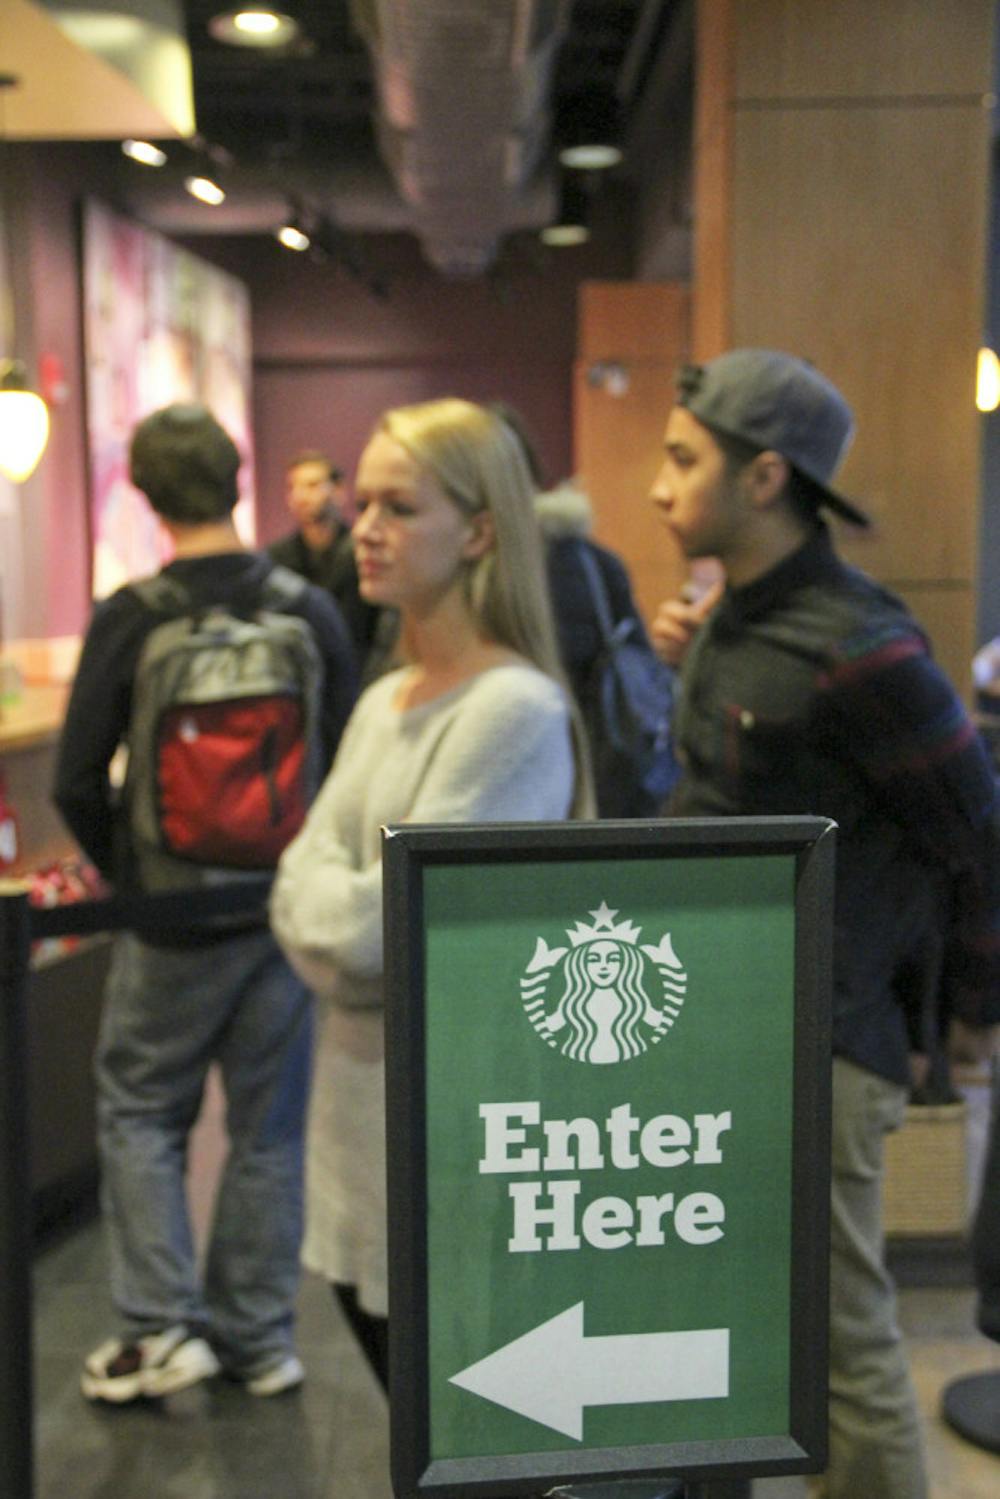 <p class="p1"><span class="s1">Hanna Smith (left), a 20-year-old UF philosophy sophomore, stands in the line at the Starbucks in Library West on Monday afternoon. Smith said she was studying for her agricultural ecology final. “I was falling asleep up there, so I thought it was time for a Starbucks run.”</span></p>